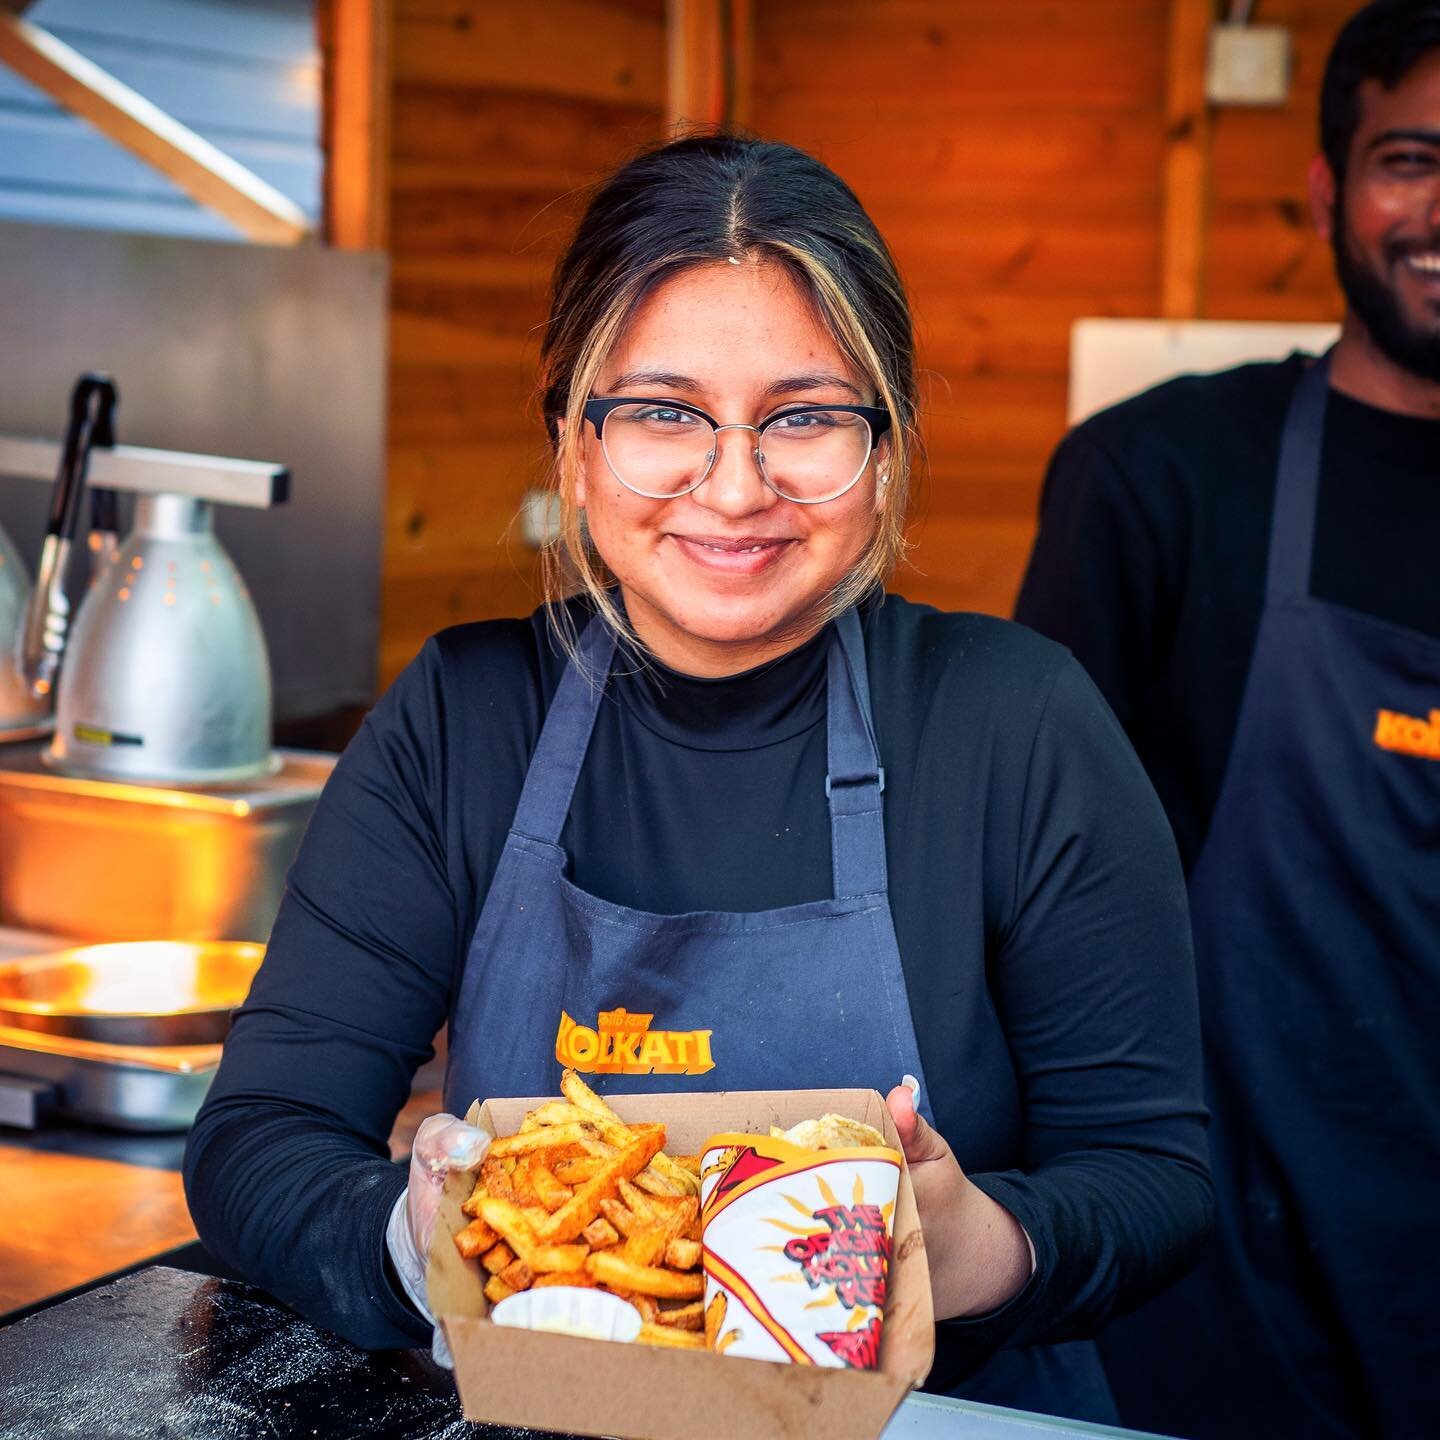 💥 KOLKATI ARE HIRING 💥

Summers fast approaching ‼️✨ And if you&rsquo;re passionate about good food and good times, then we want to hear from you! 

With roles coming up for our east London markets, Camden kiosk and a summer of festivals, we are on